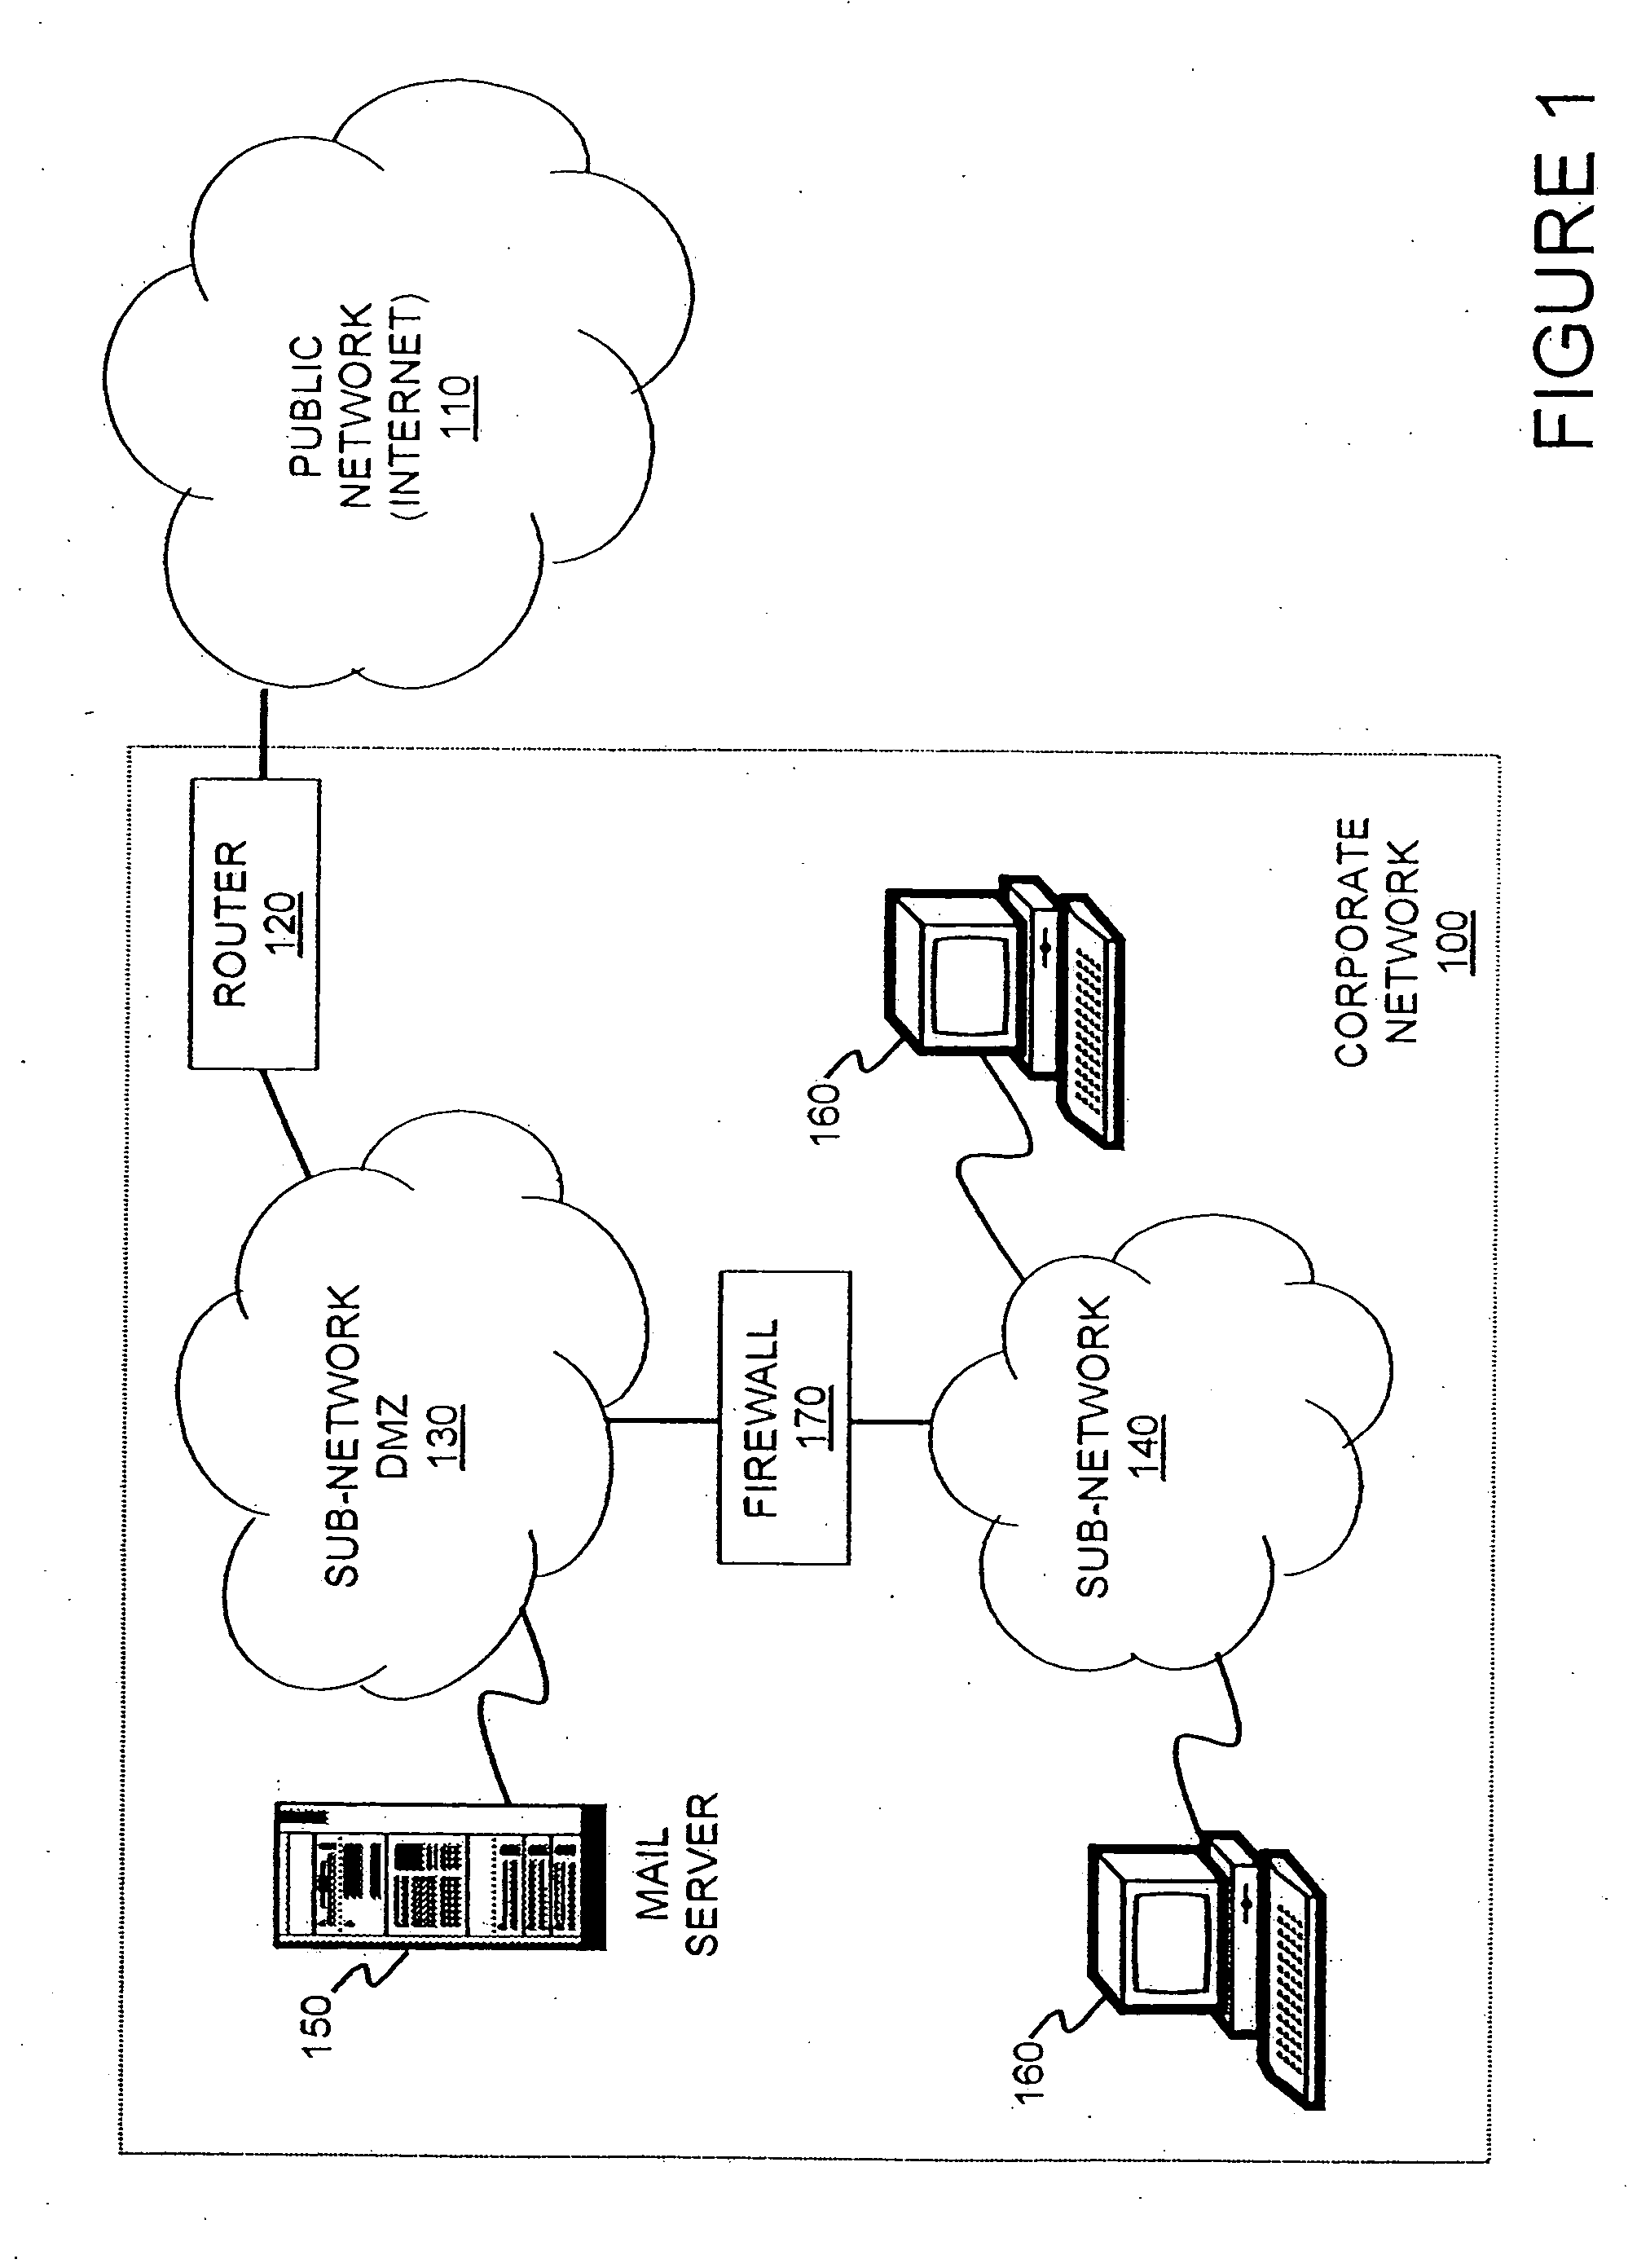 Method and apparatus for network wide policy-based analysis of configurations of devices